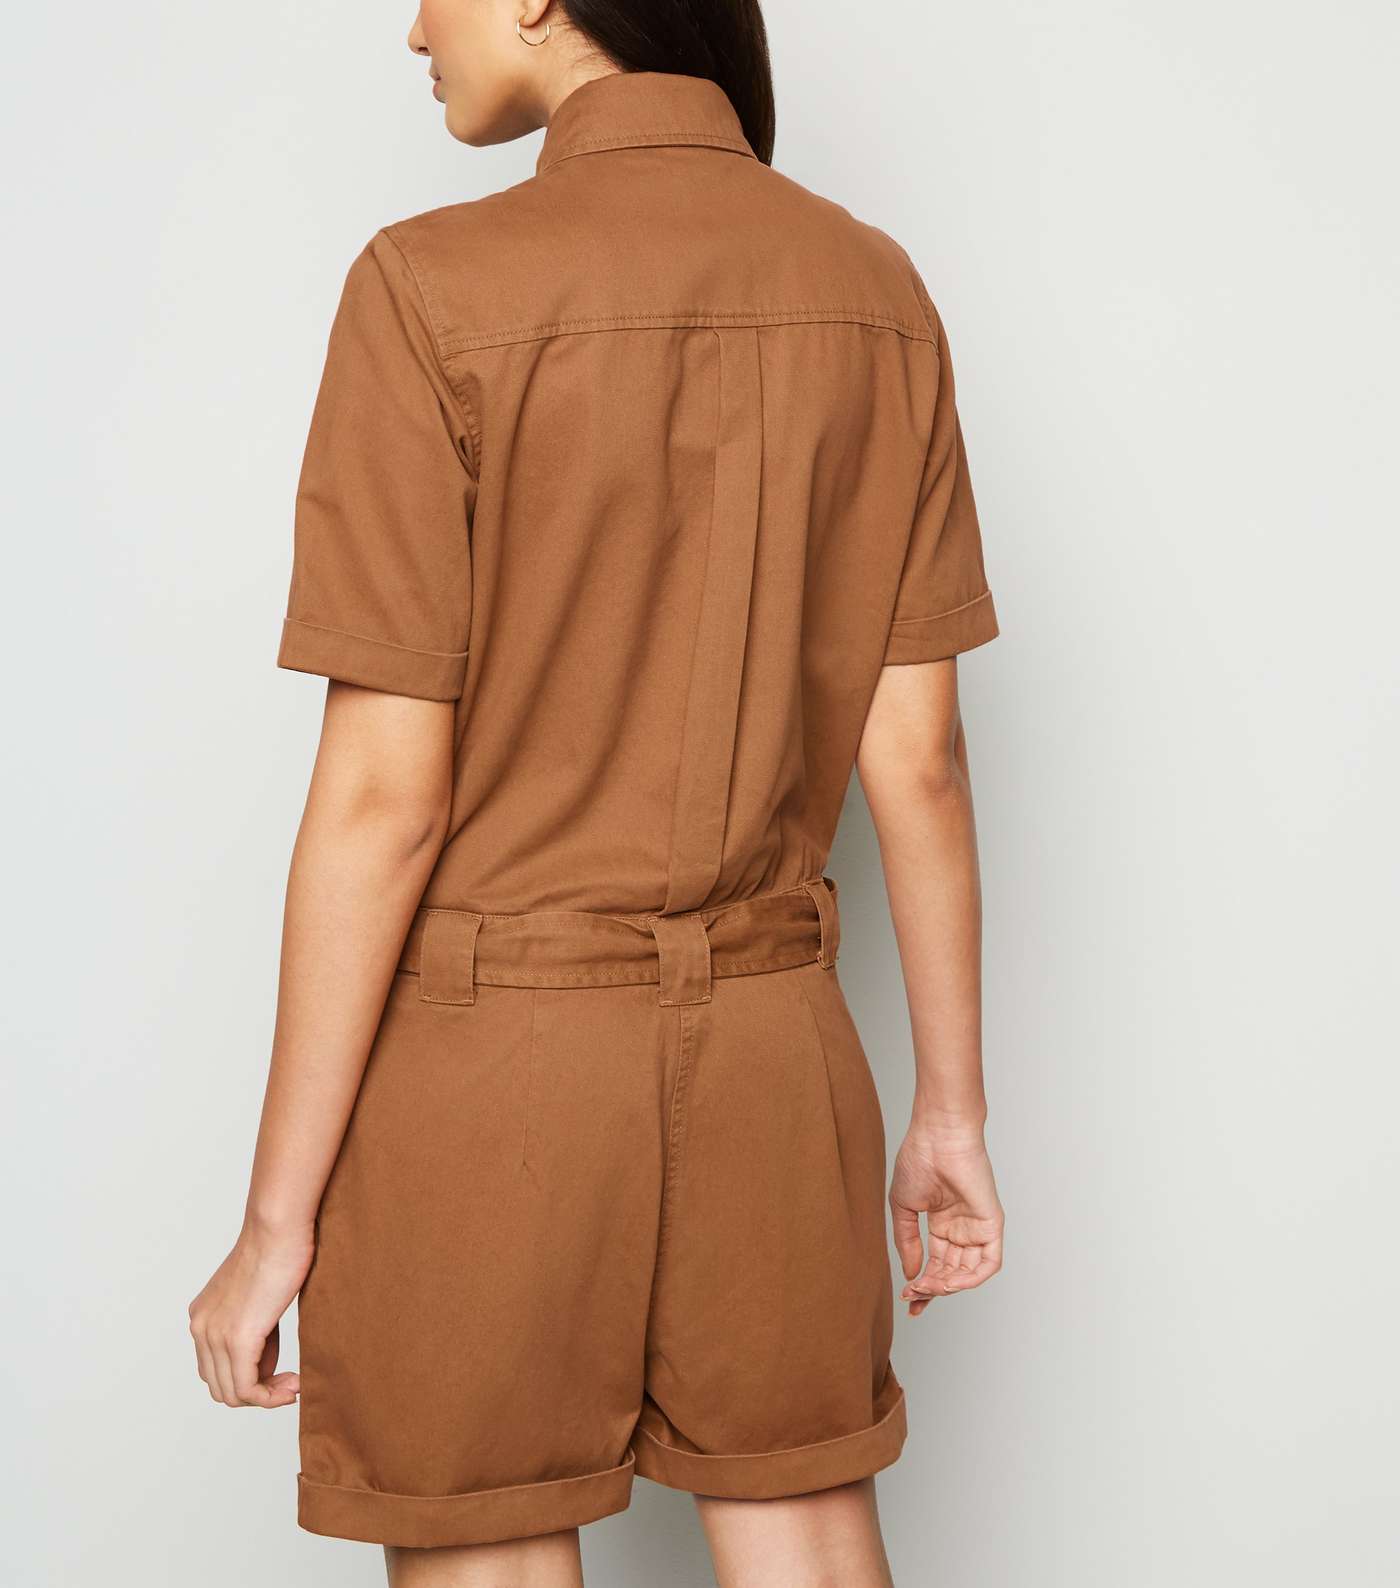 JDY Tan Button-Up Belted Playsuit Image 3